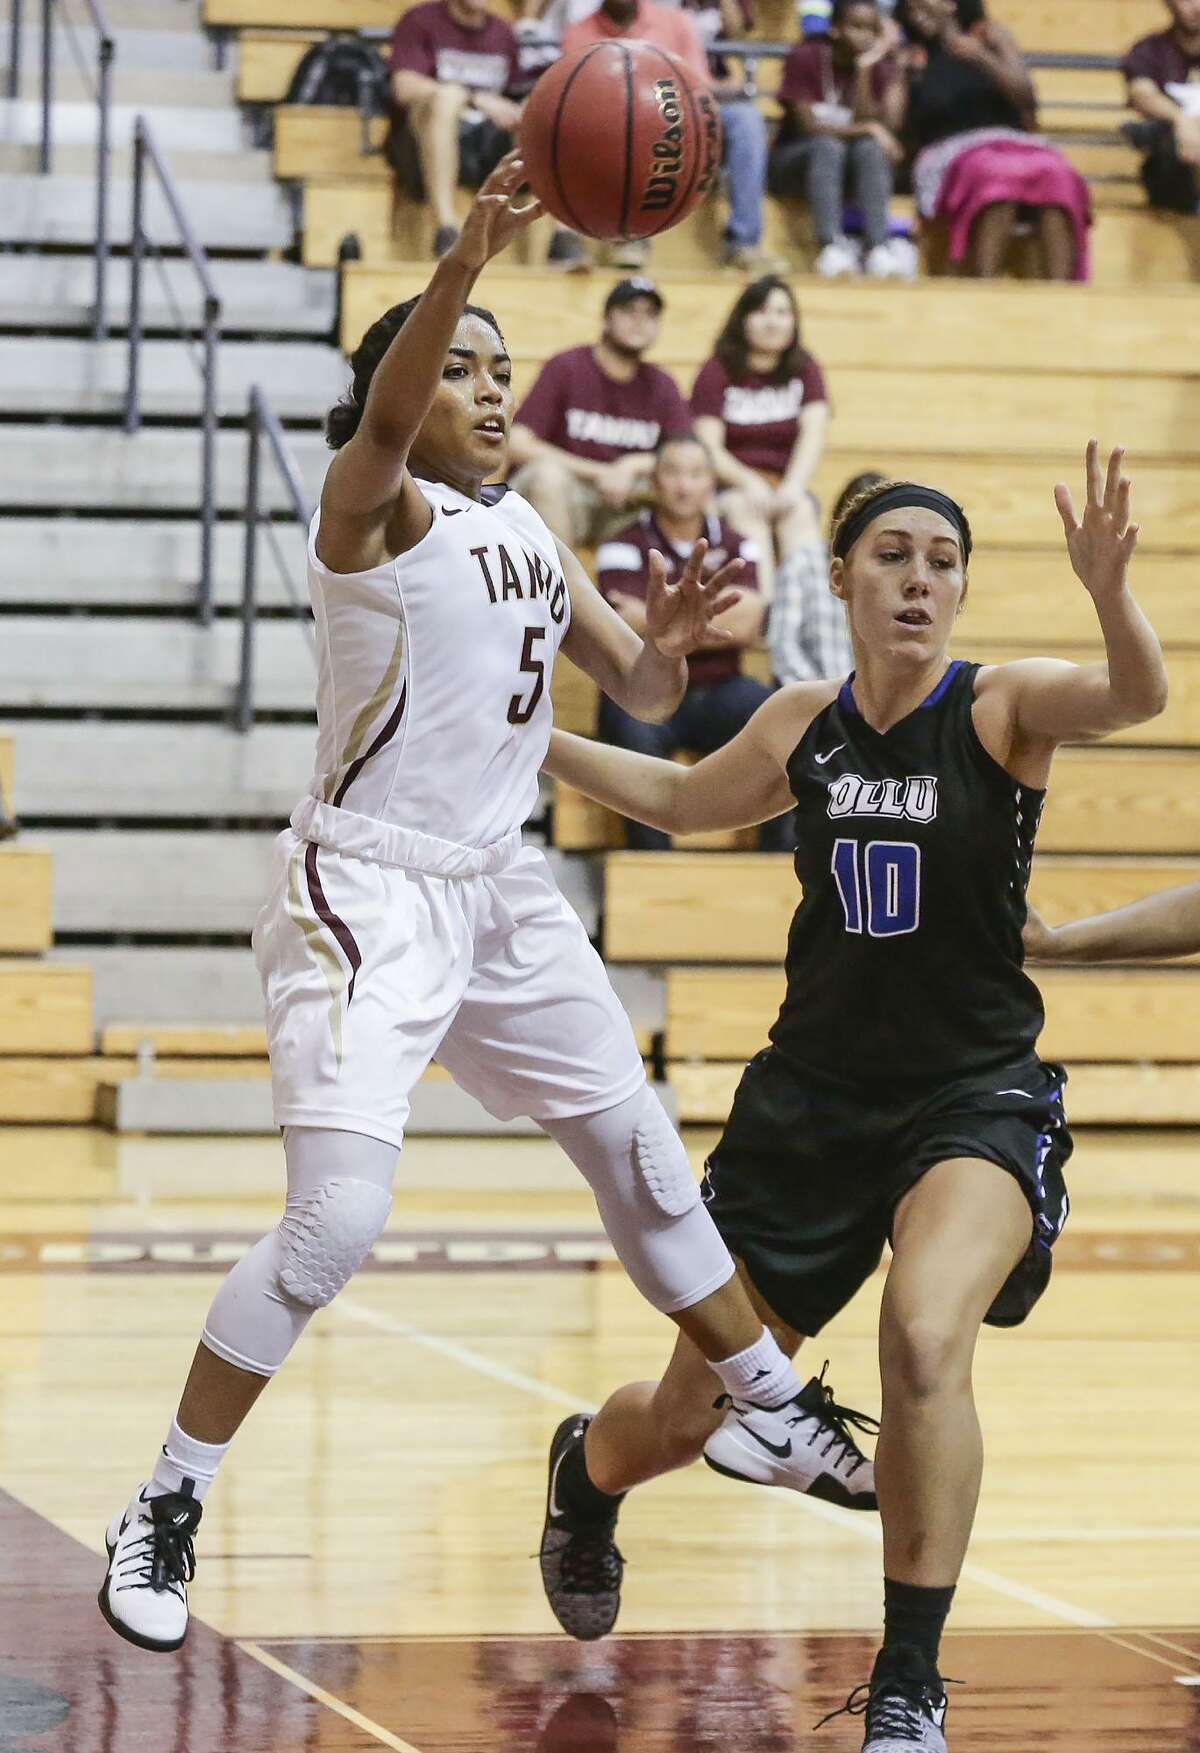 The Dustdevils will get Victoria Shelton back in the lineup this week to give the team a sixth player to avoid having to play all five starters 40 minutes apiece.